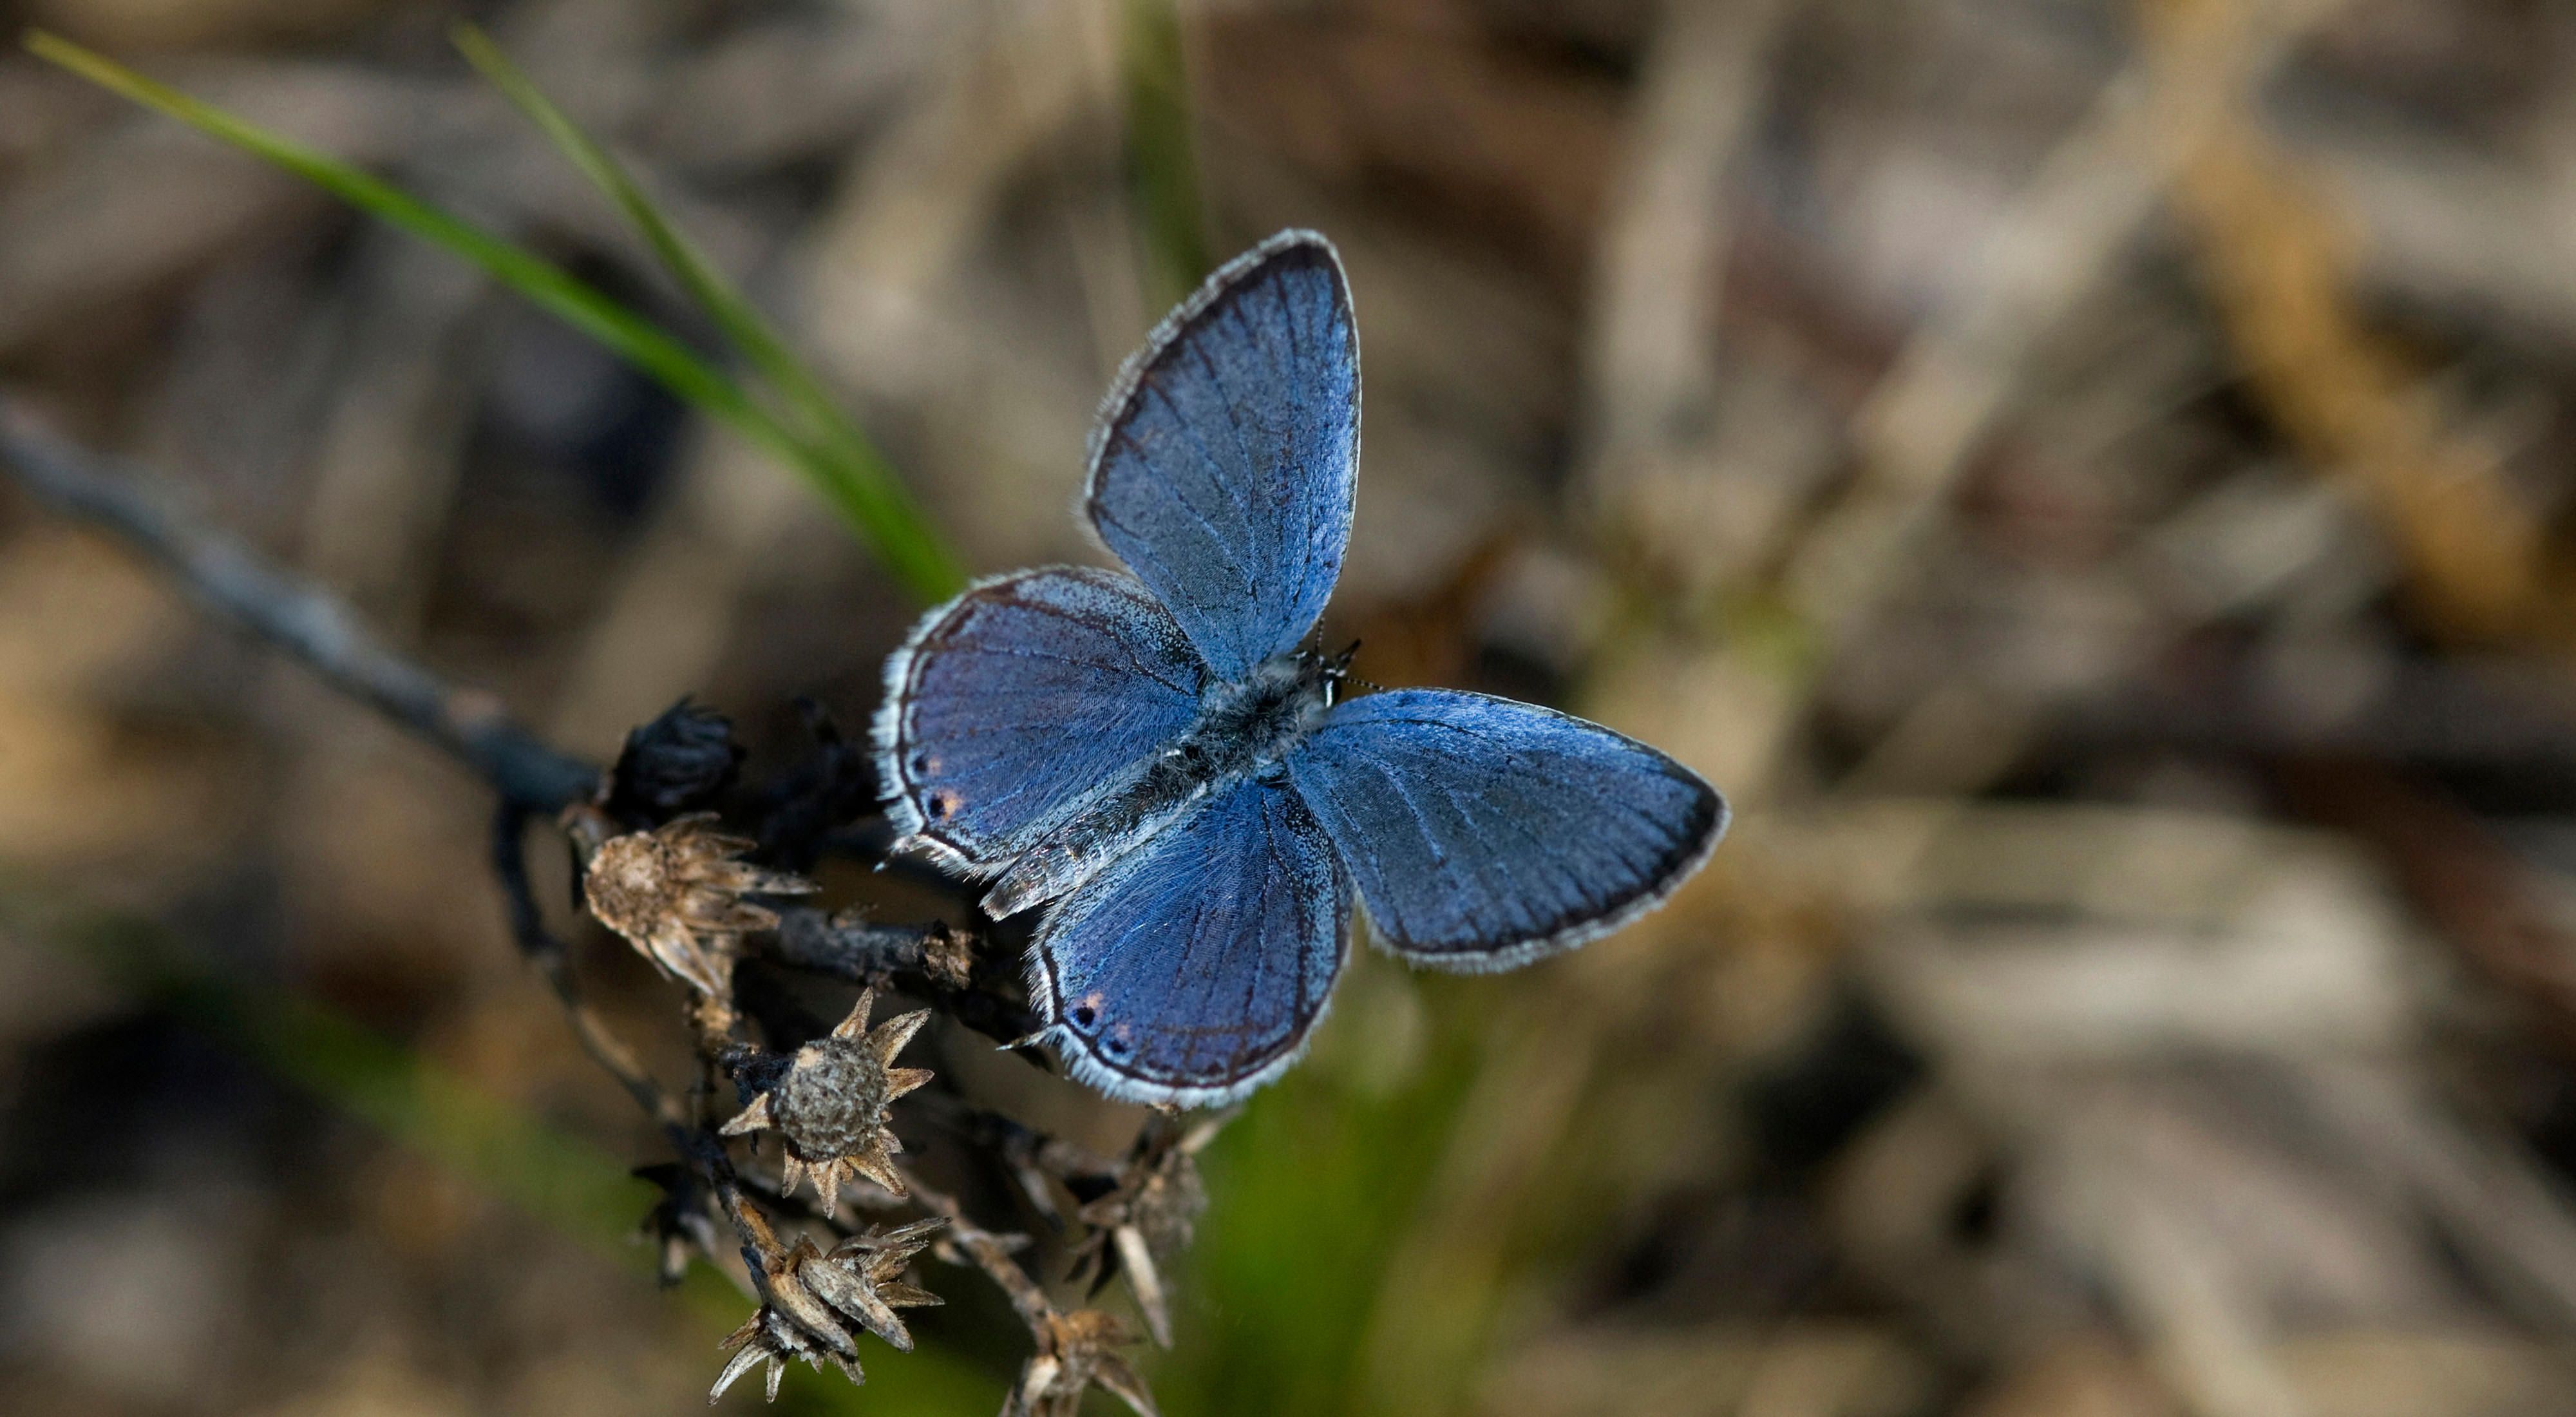 Blue butterfly in native habitat at Kankakee Sands.